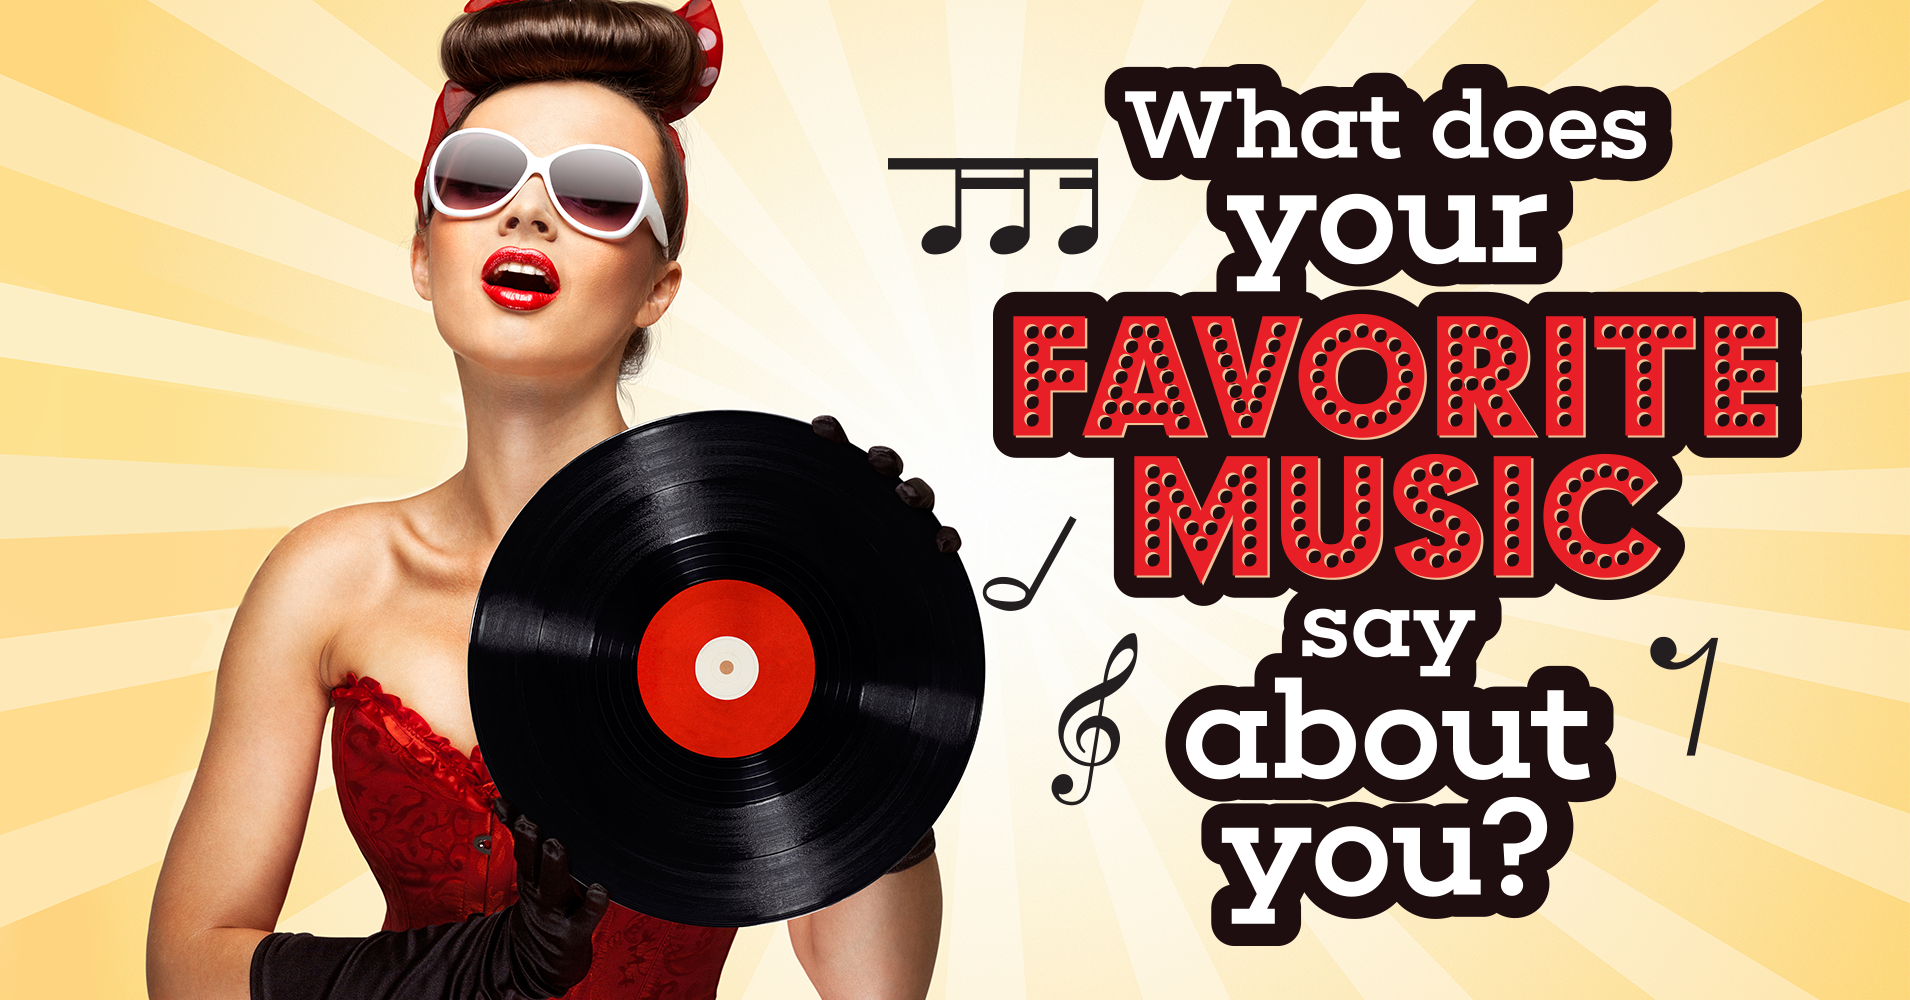 What Does Your Favorite Music Say About You? - Quiz - Quizony.com